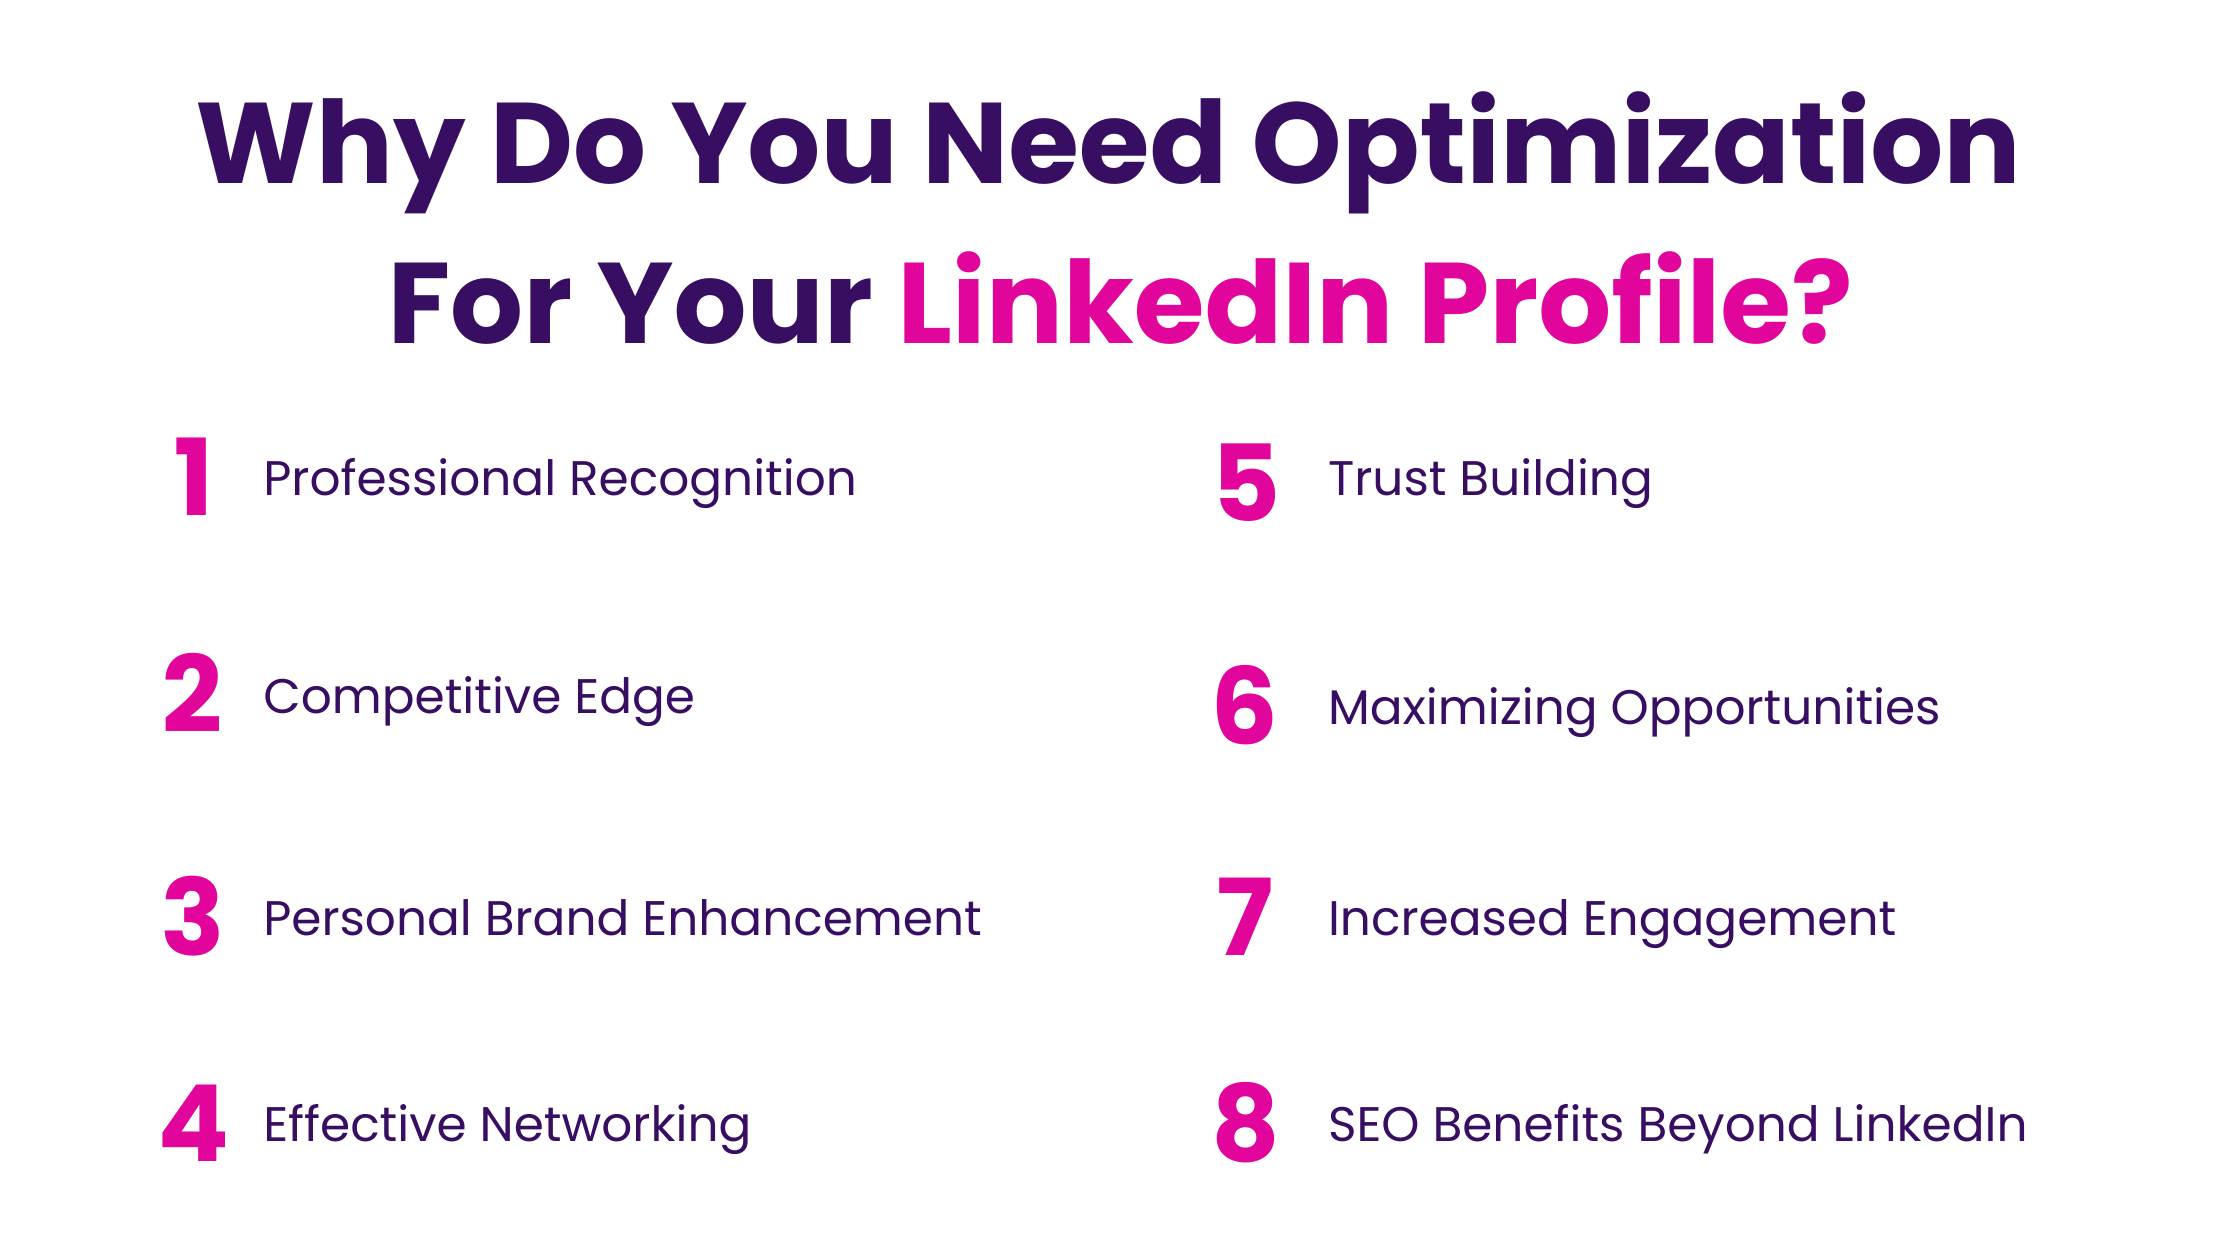 Why Do You Need Optimization For Your LinkedIn Profile